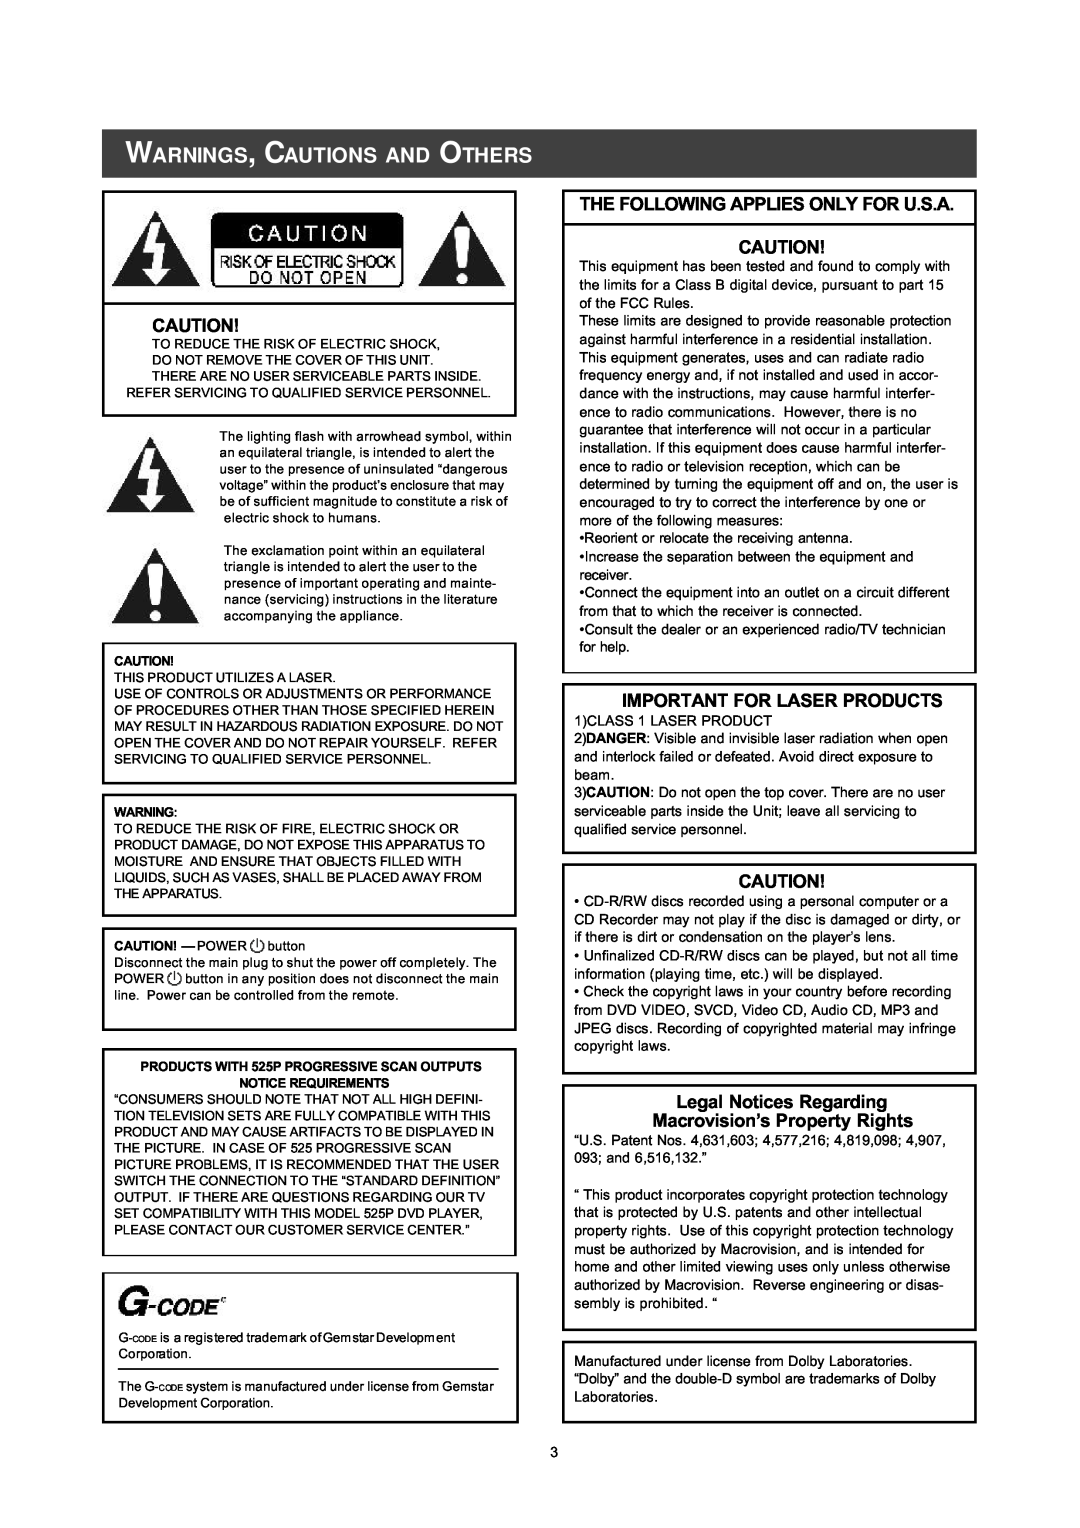 Philips DVDR560H Warnings, Cautions And Others, The Following Applies Only For U.S.A, Important For Laser Products 